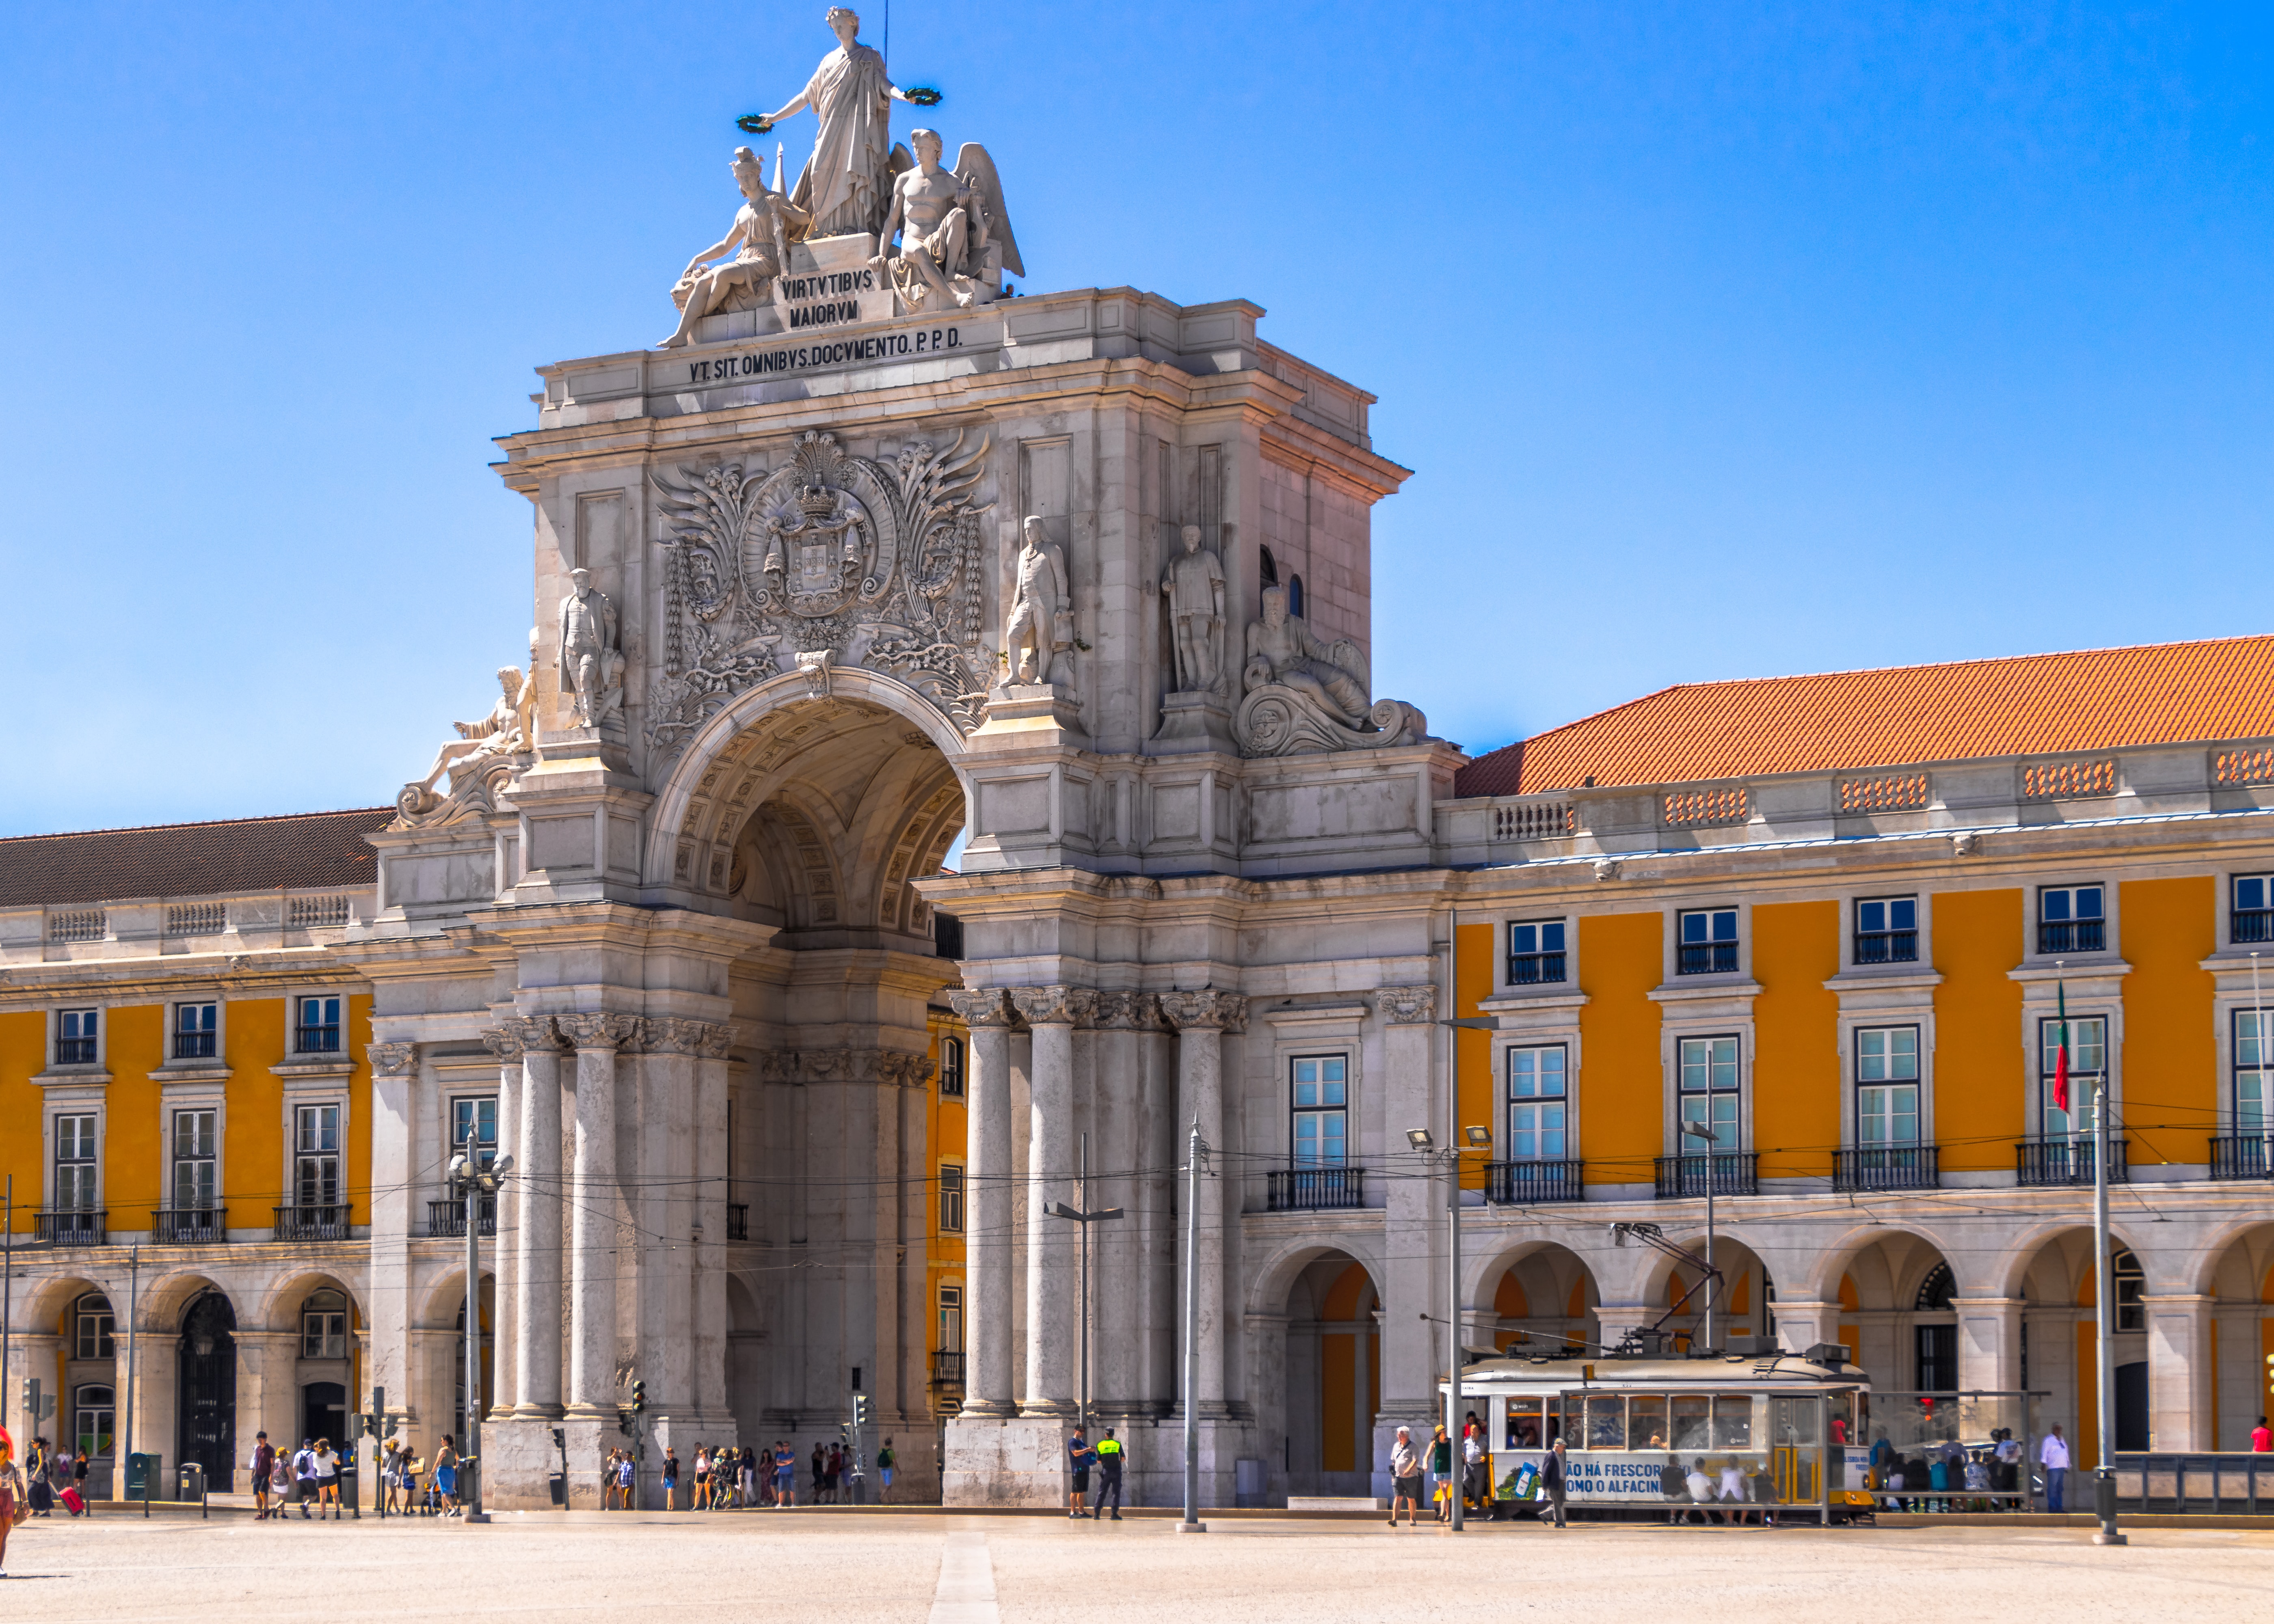 The Ultimate Travel Itinerary: 3 days in Lisbon